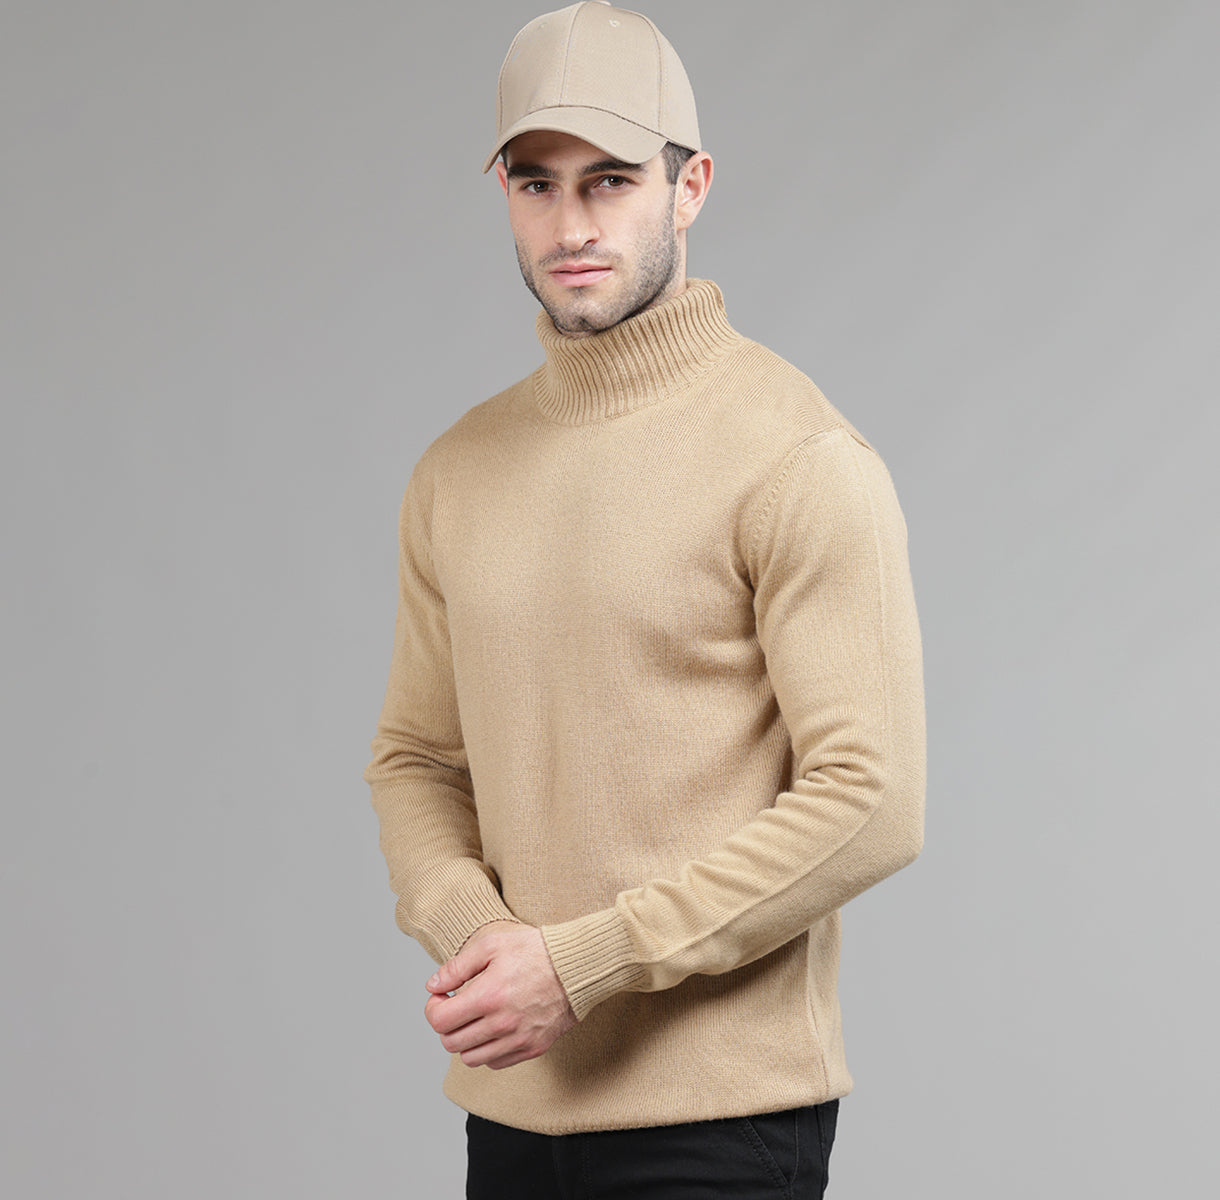 HIGH NECK  SLIM FIT FULL SLEEVES SWEATER